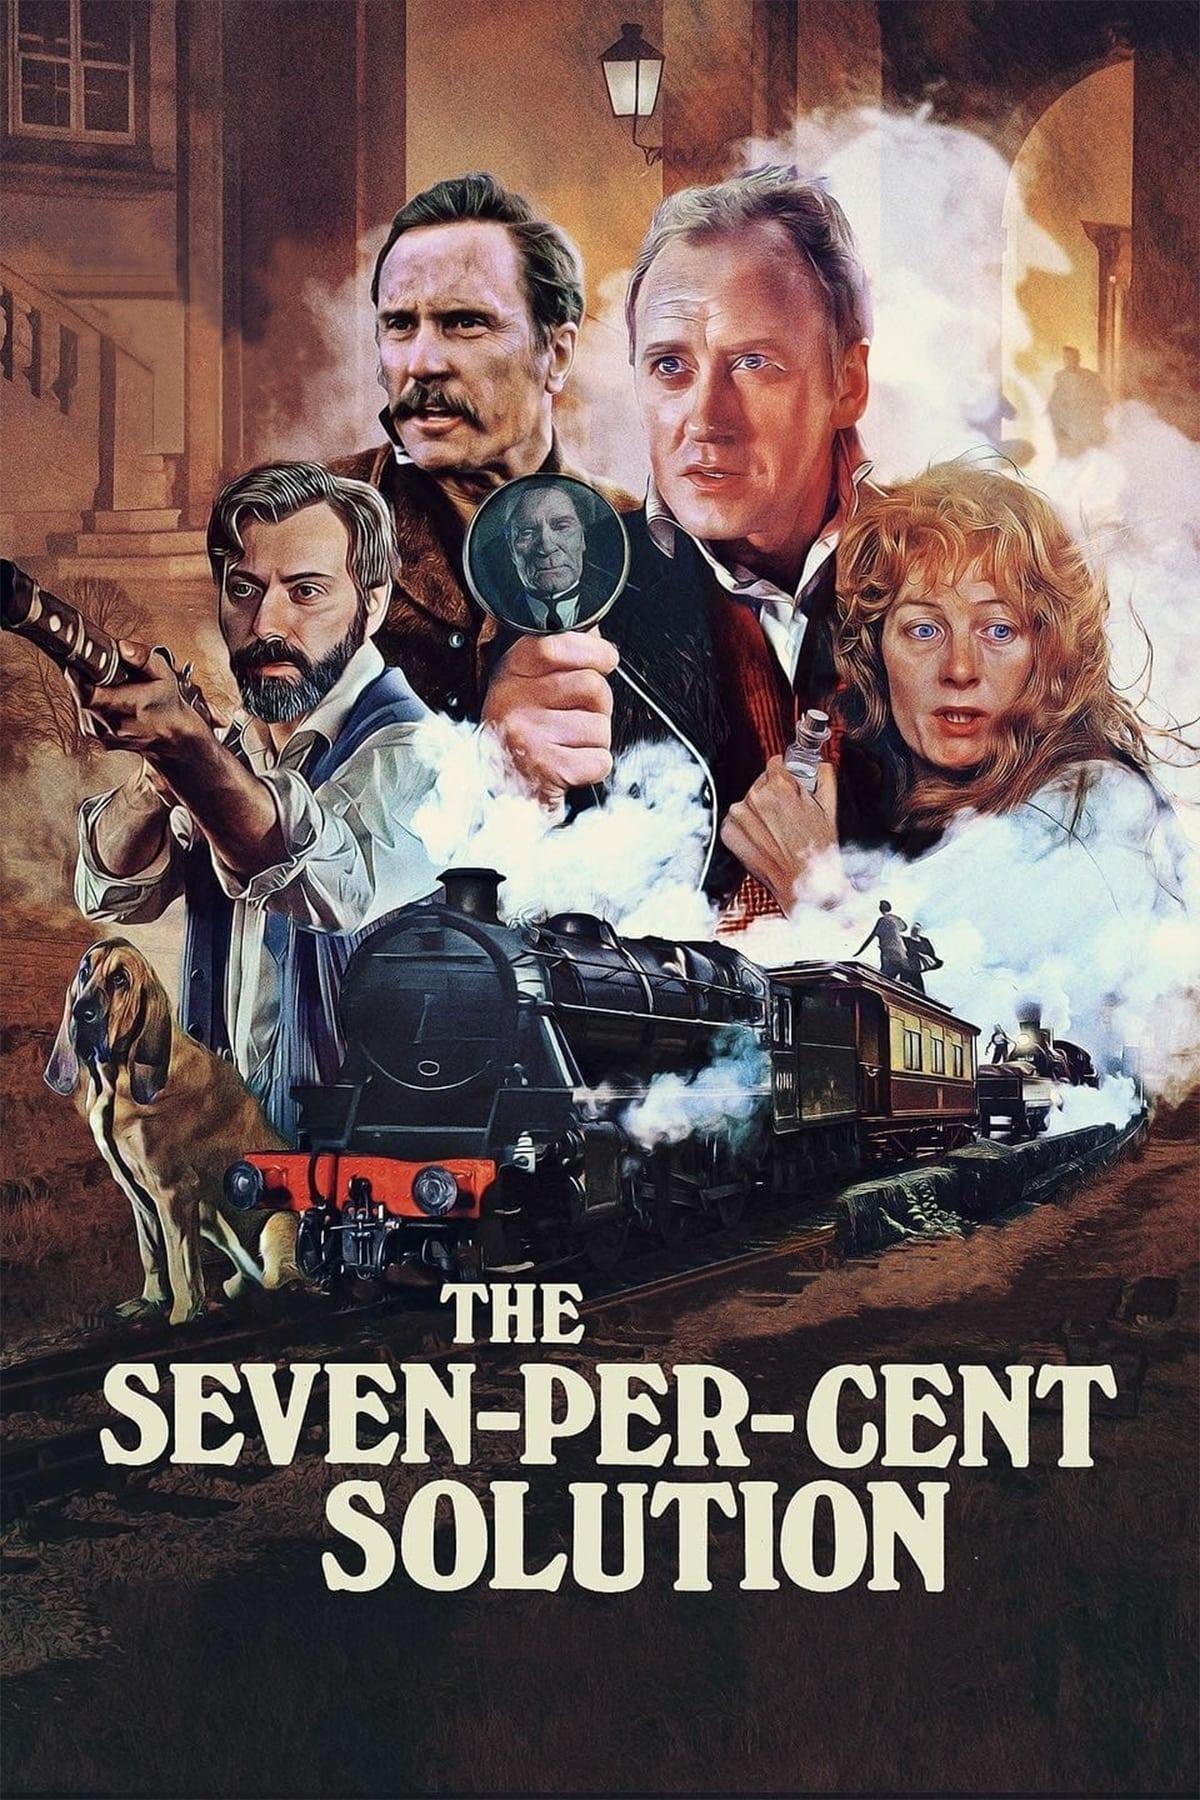 The Seven-Per-Cent Solution poster